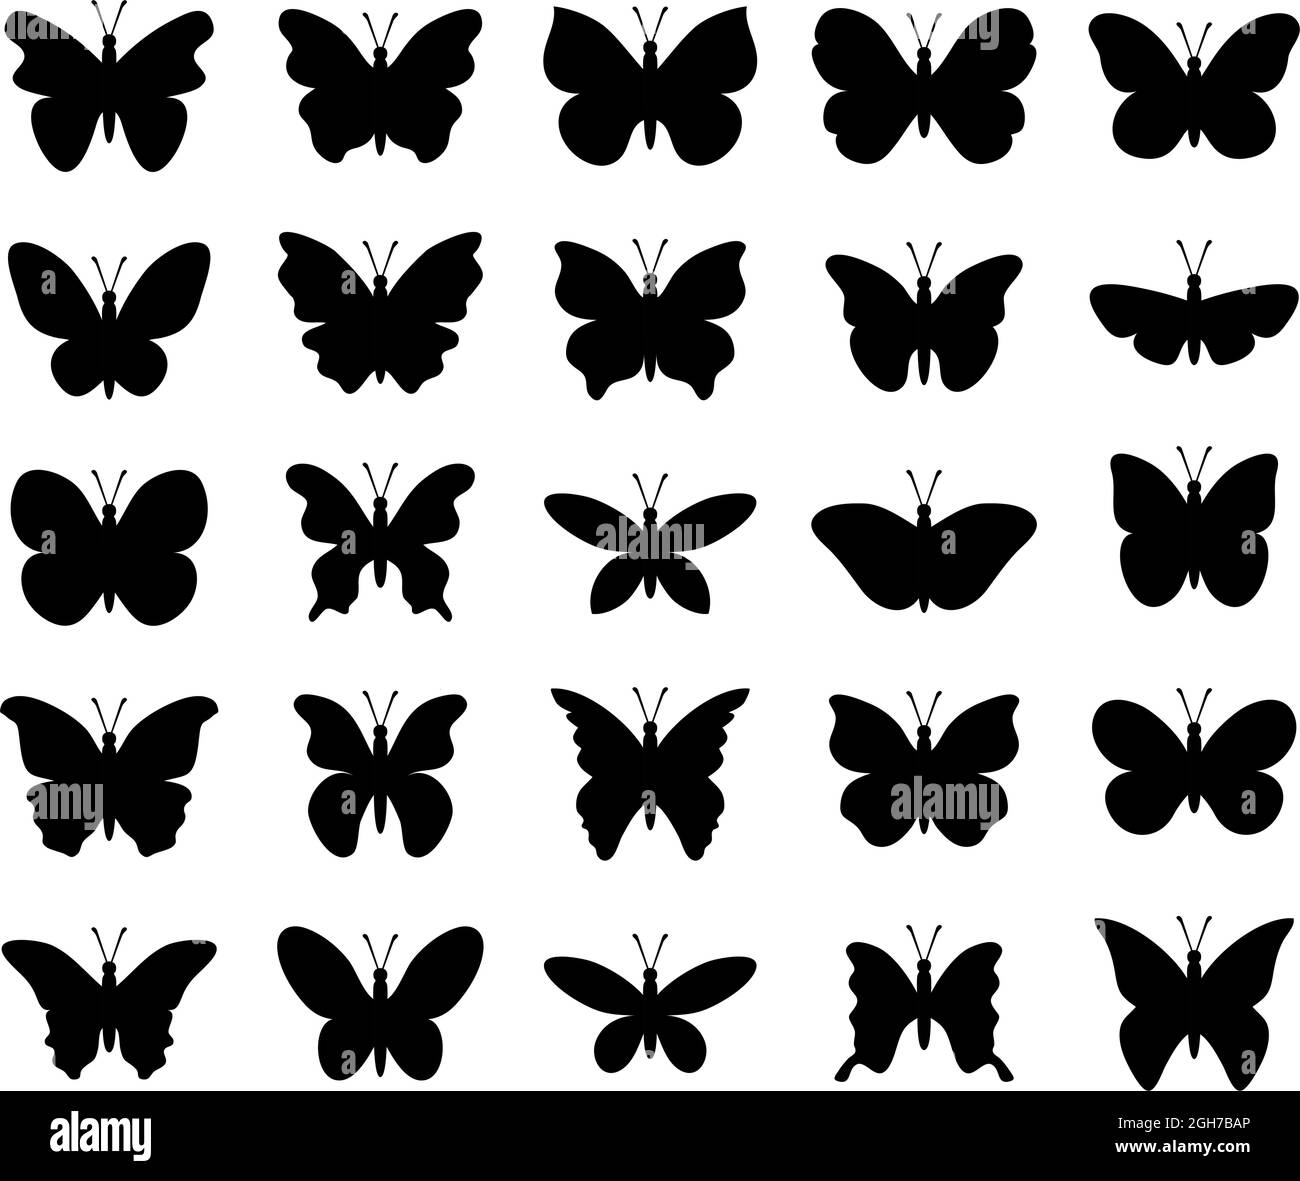 vector beautiful butterfly insect icons isolated on white background. silhouette of tropical butterflies. summer nature illustration Stock Vector